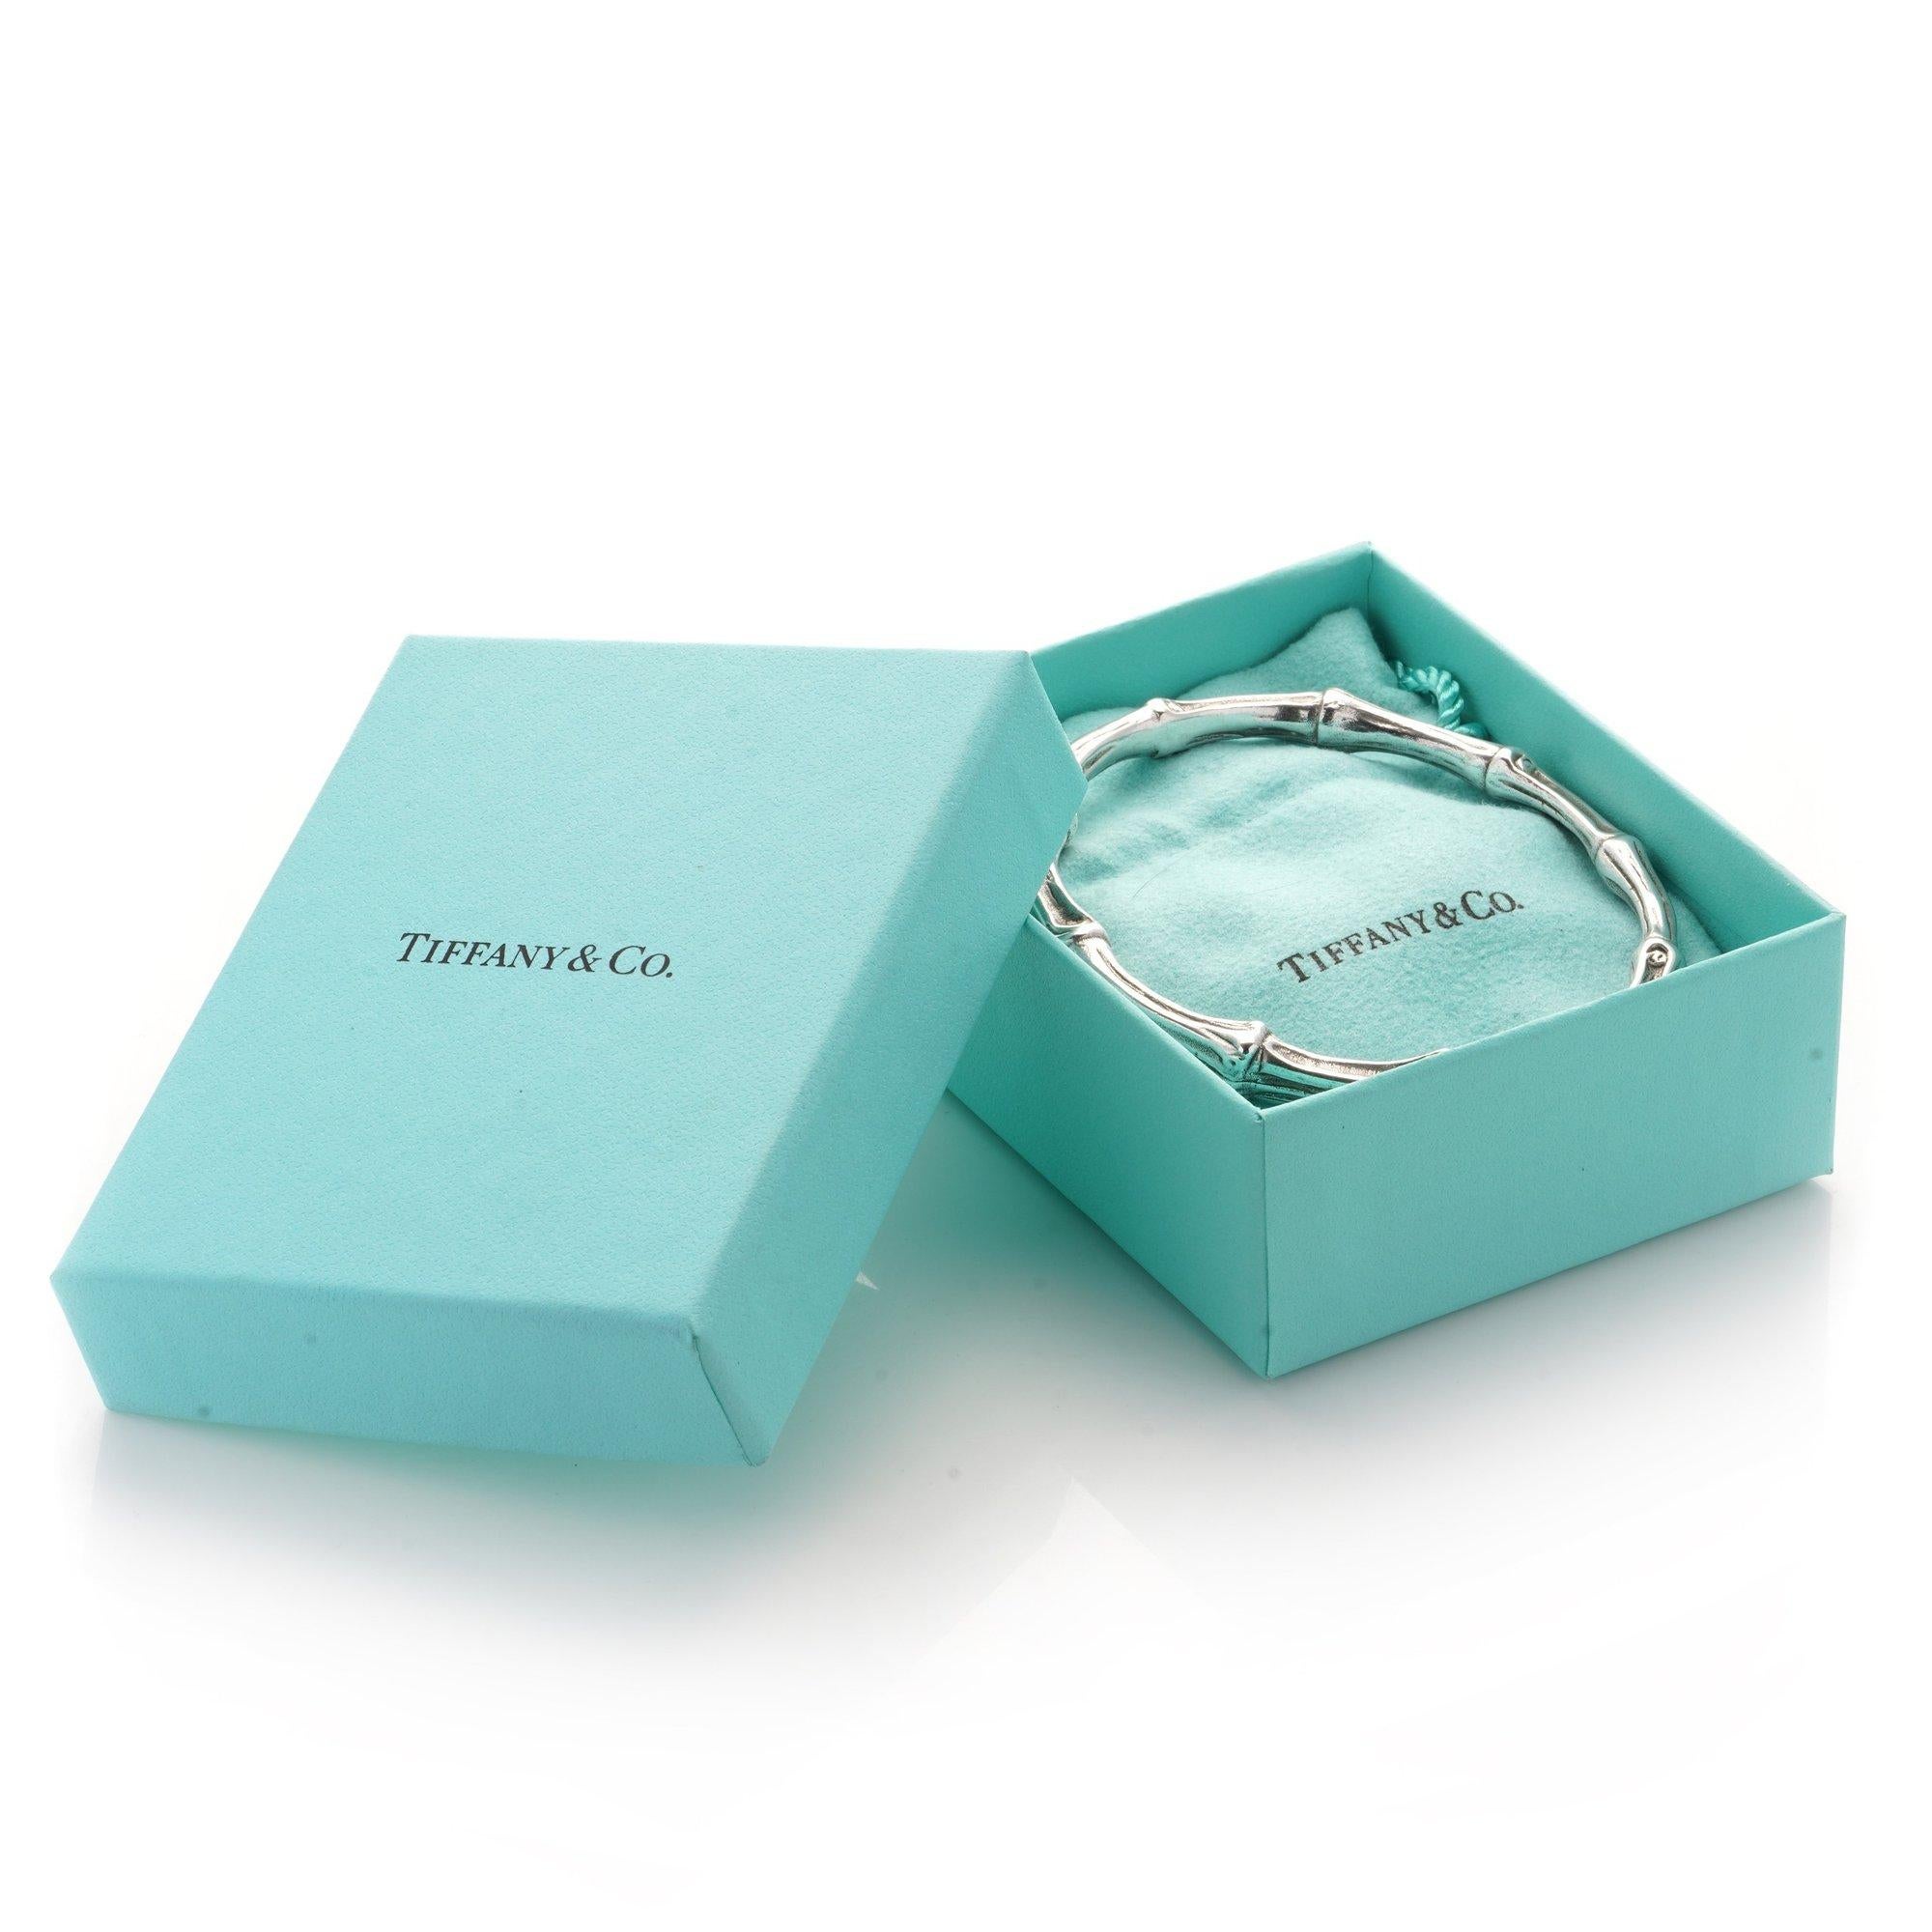 Tiffany & Co. sterling silver bangle in the shape of bamboo.
Made London 1996
Fully hallmarked sterling silver and Tiffany & Co.

Comes in original box and travel pouch.

Dimensions -
Length x width: 7.7 x 7.3 cm
Weight: 46 grams

Condition: Bangle